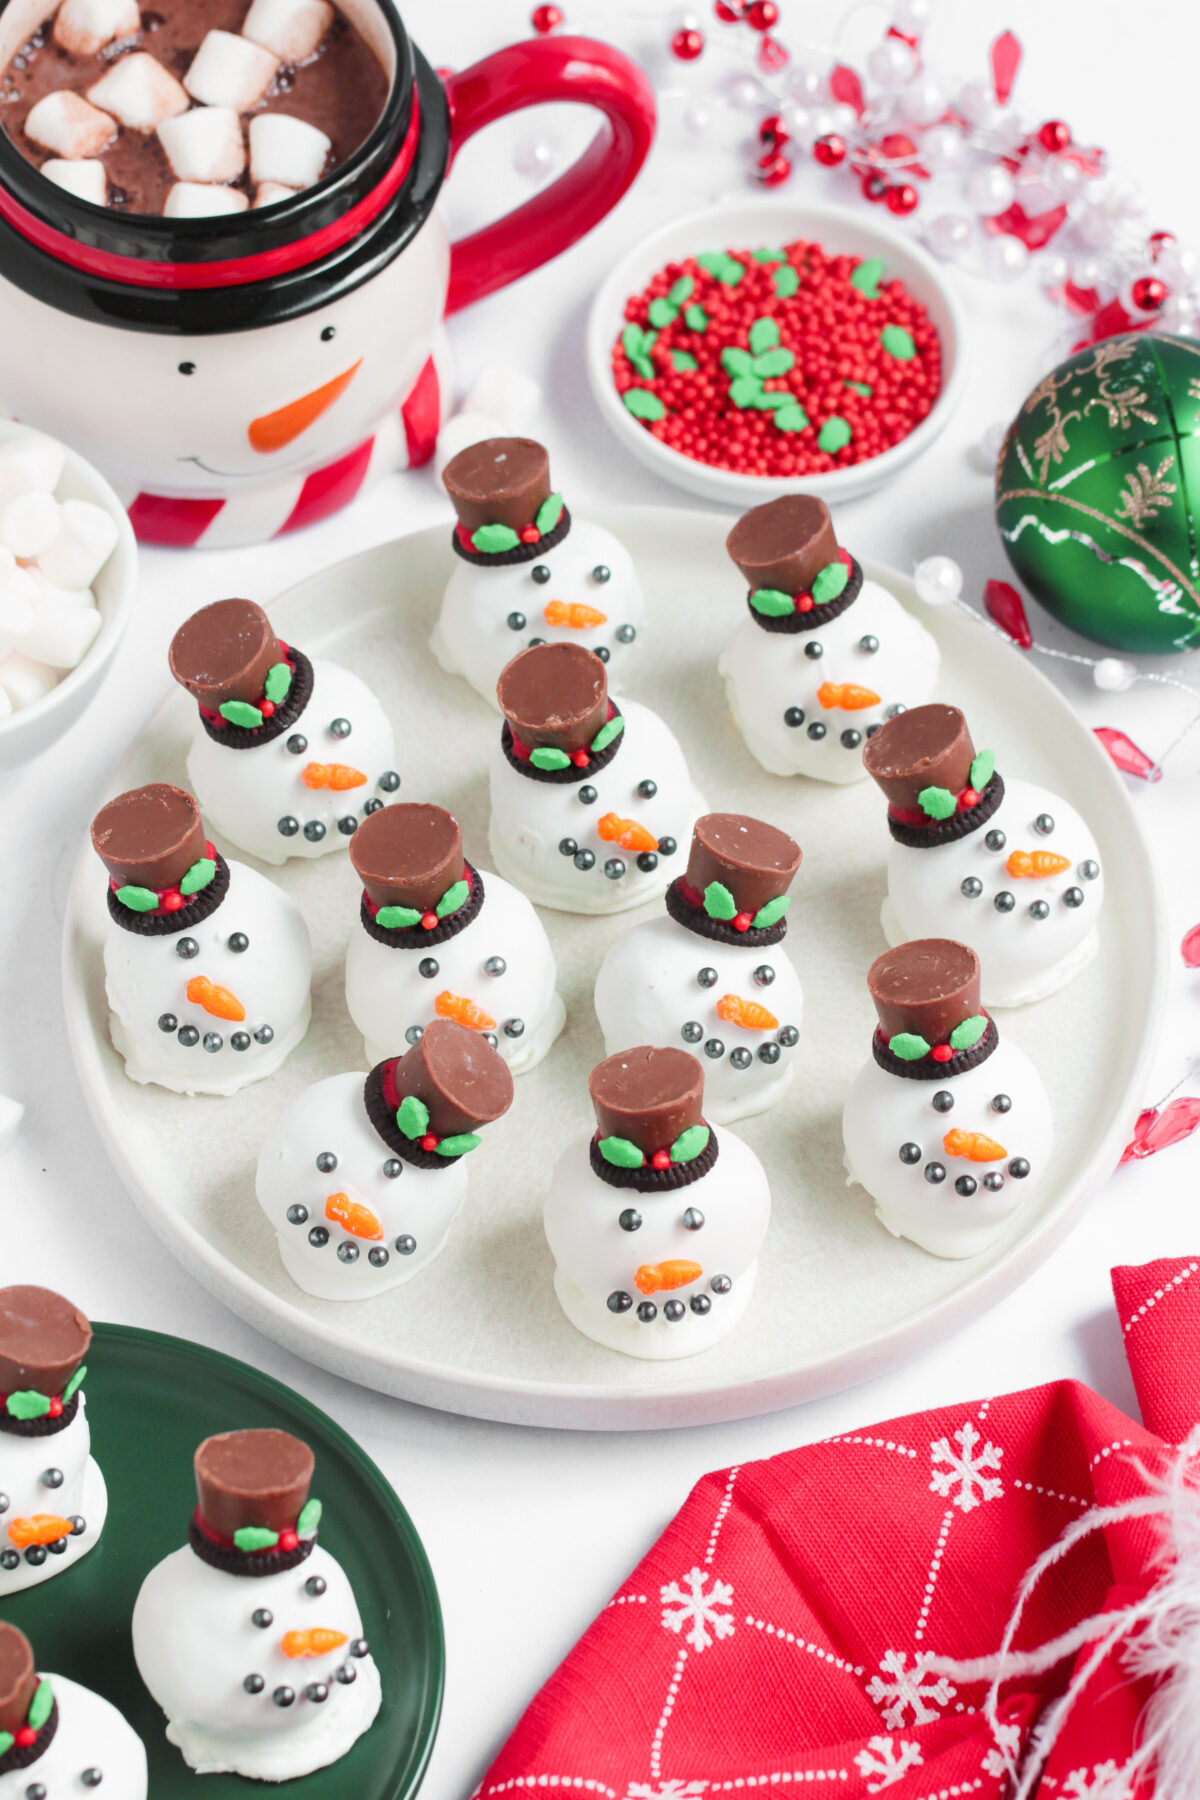 Get into the holiday spirit with these delicious and fun snowman Oreo balls. They’re sure to add cheer to your festive spread this season.